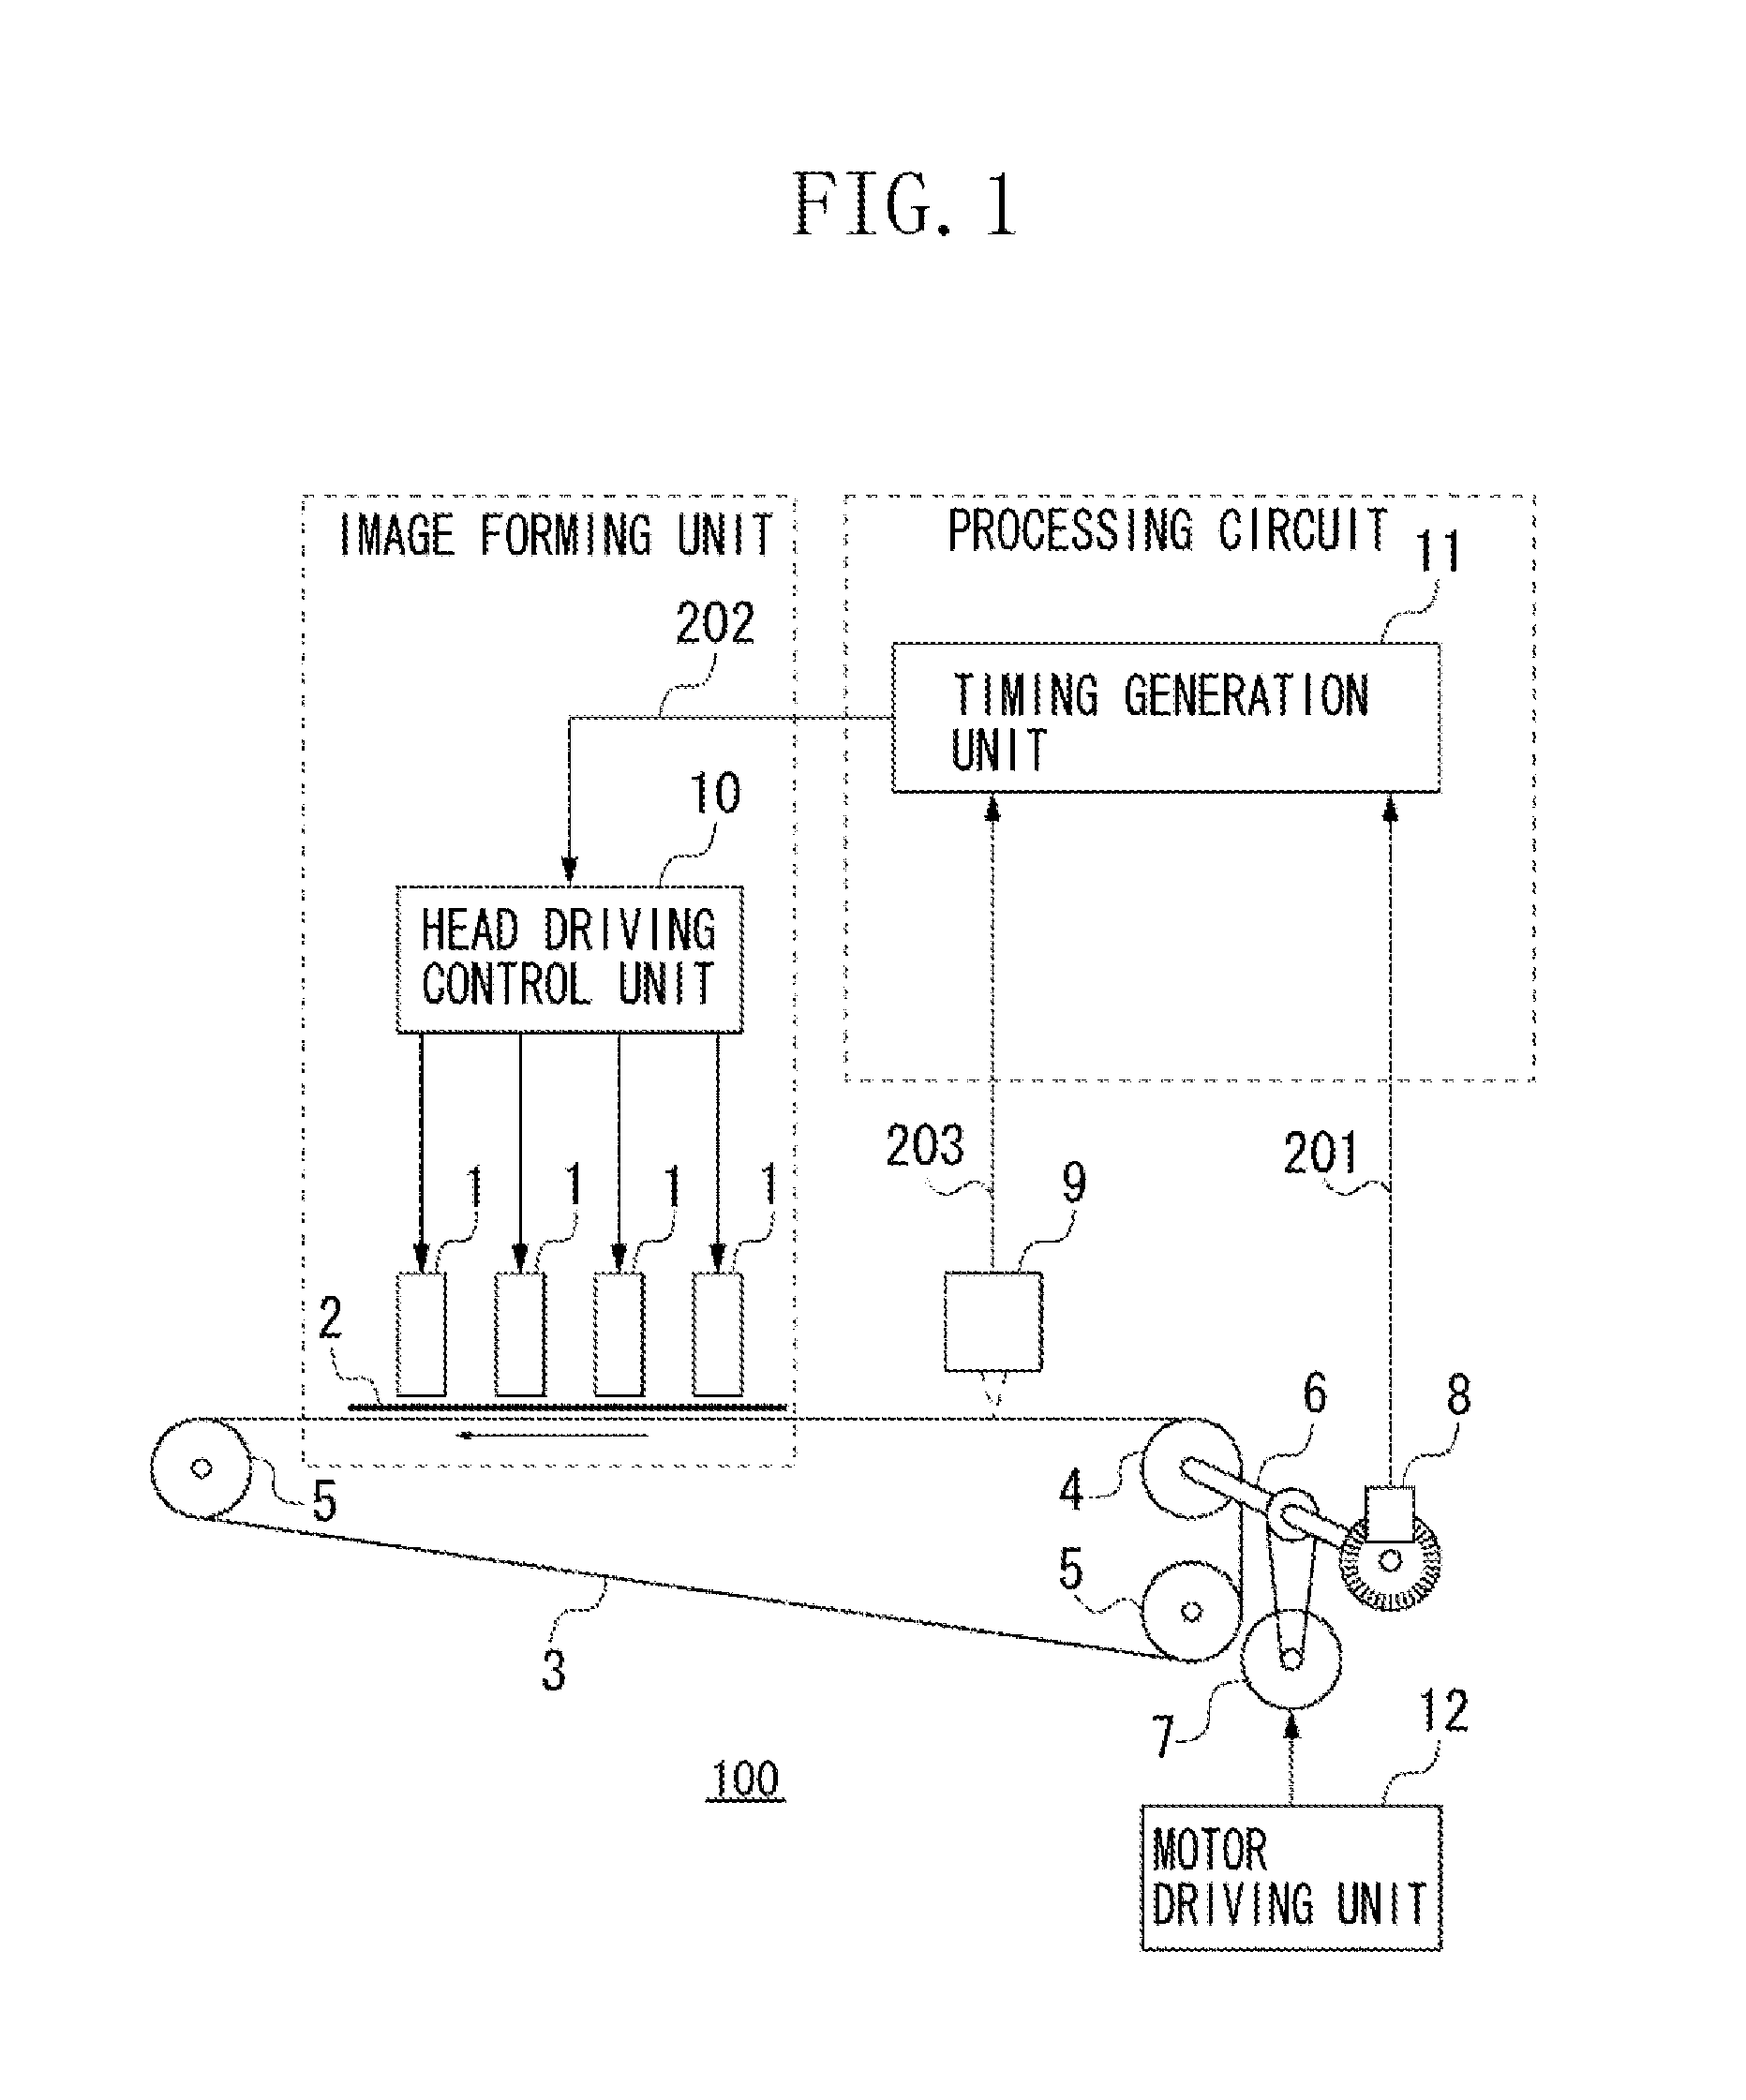 Recording apparatus and method for controlling the recording apparatus